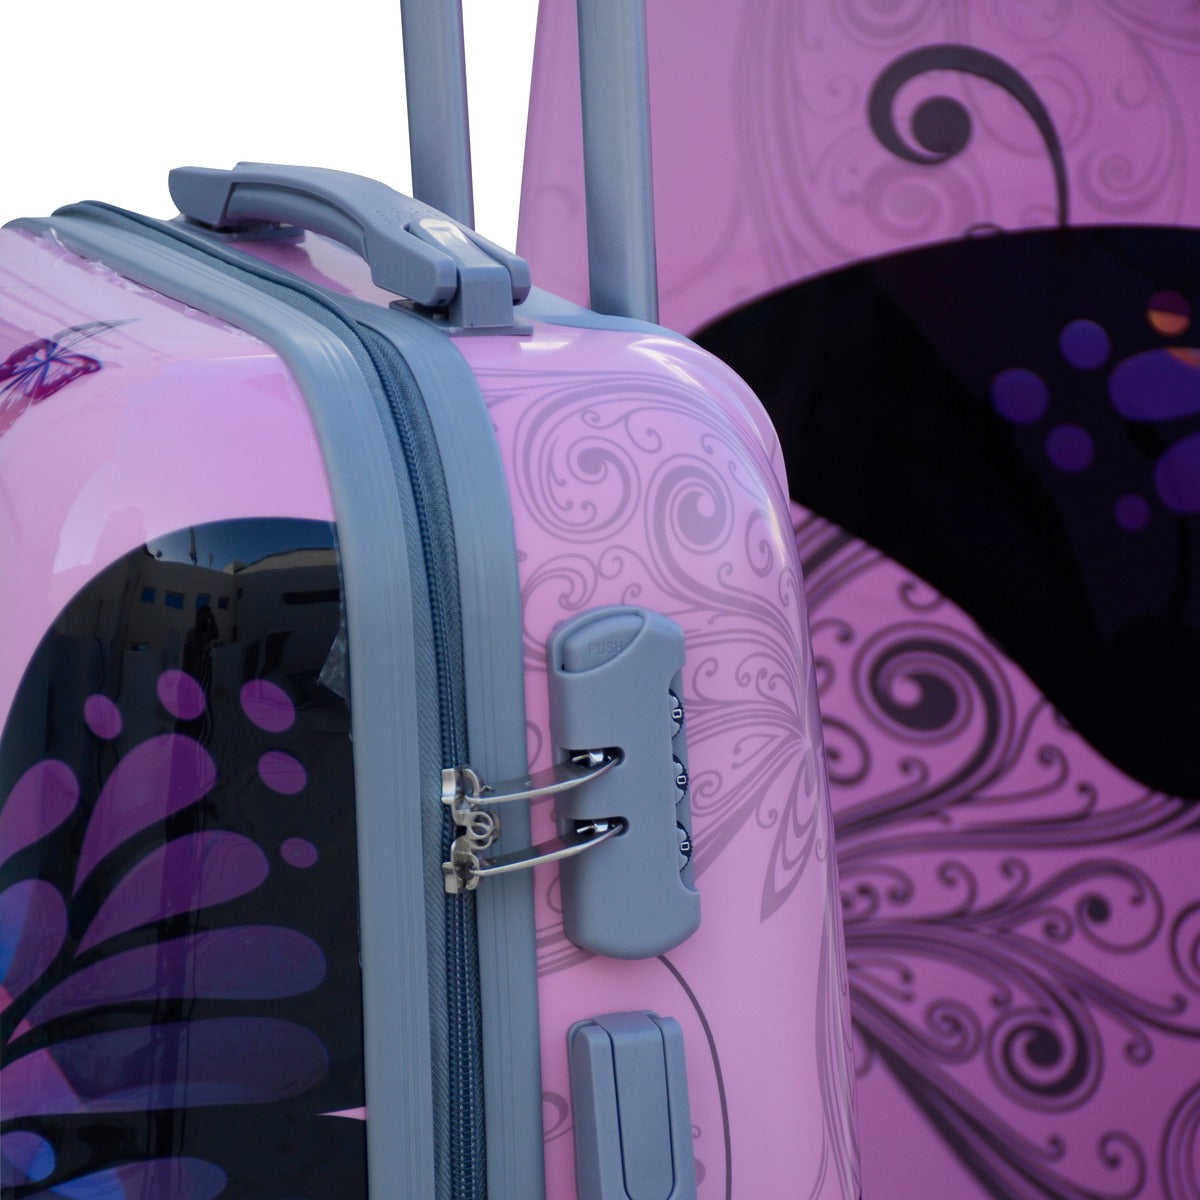 Butterfly Pink ABS 4 Wheel Printed Luggage with Spinner Wheel